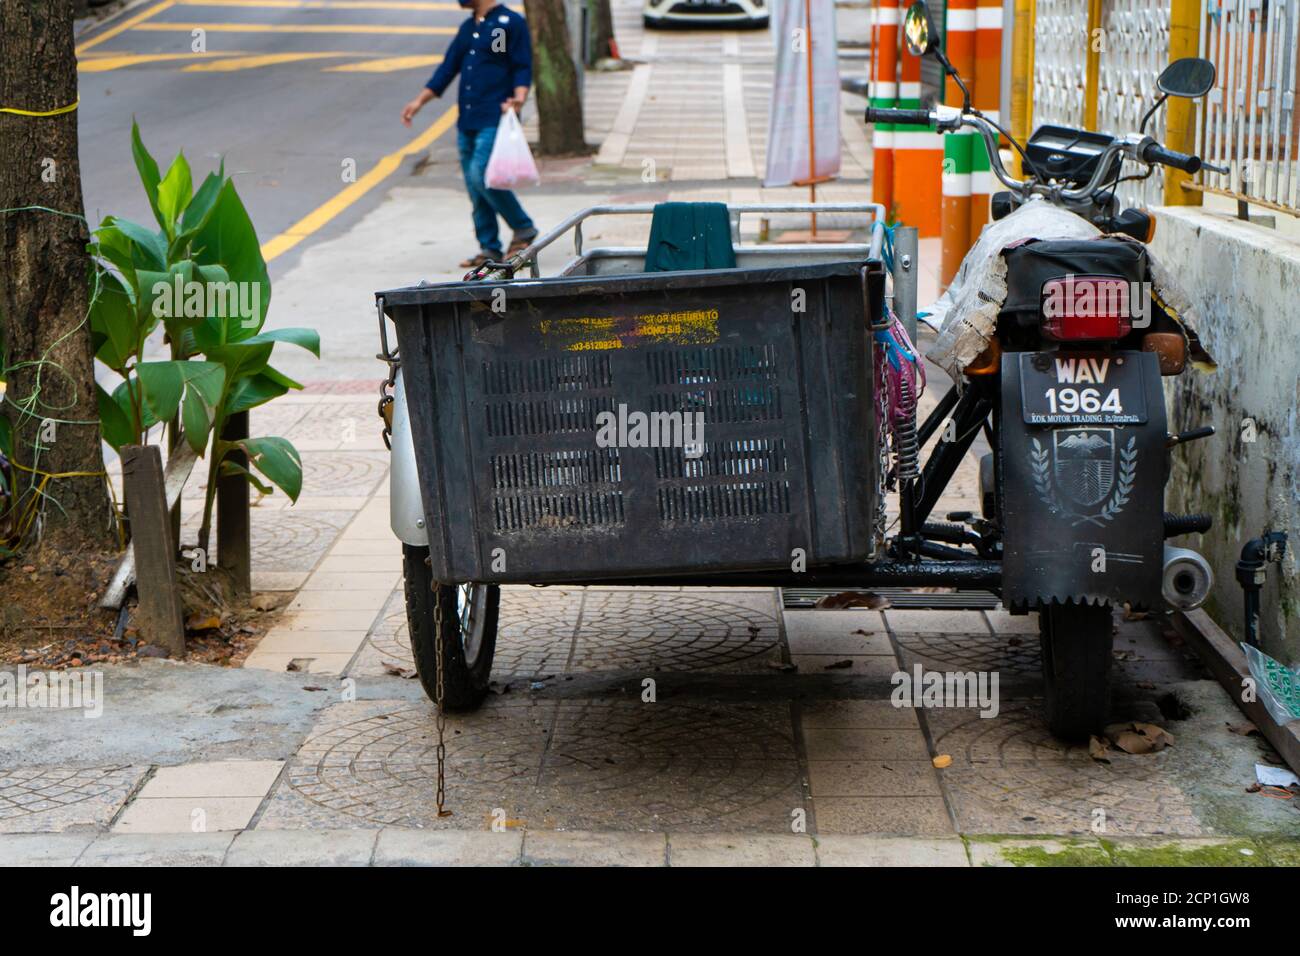 A motorcycle with a sidecar for transporting products blocks the passage along the pedestrian sidewalk. Street trading in Asia. Stock Photo